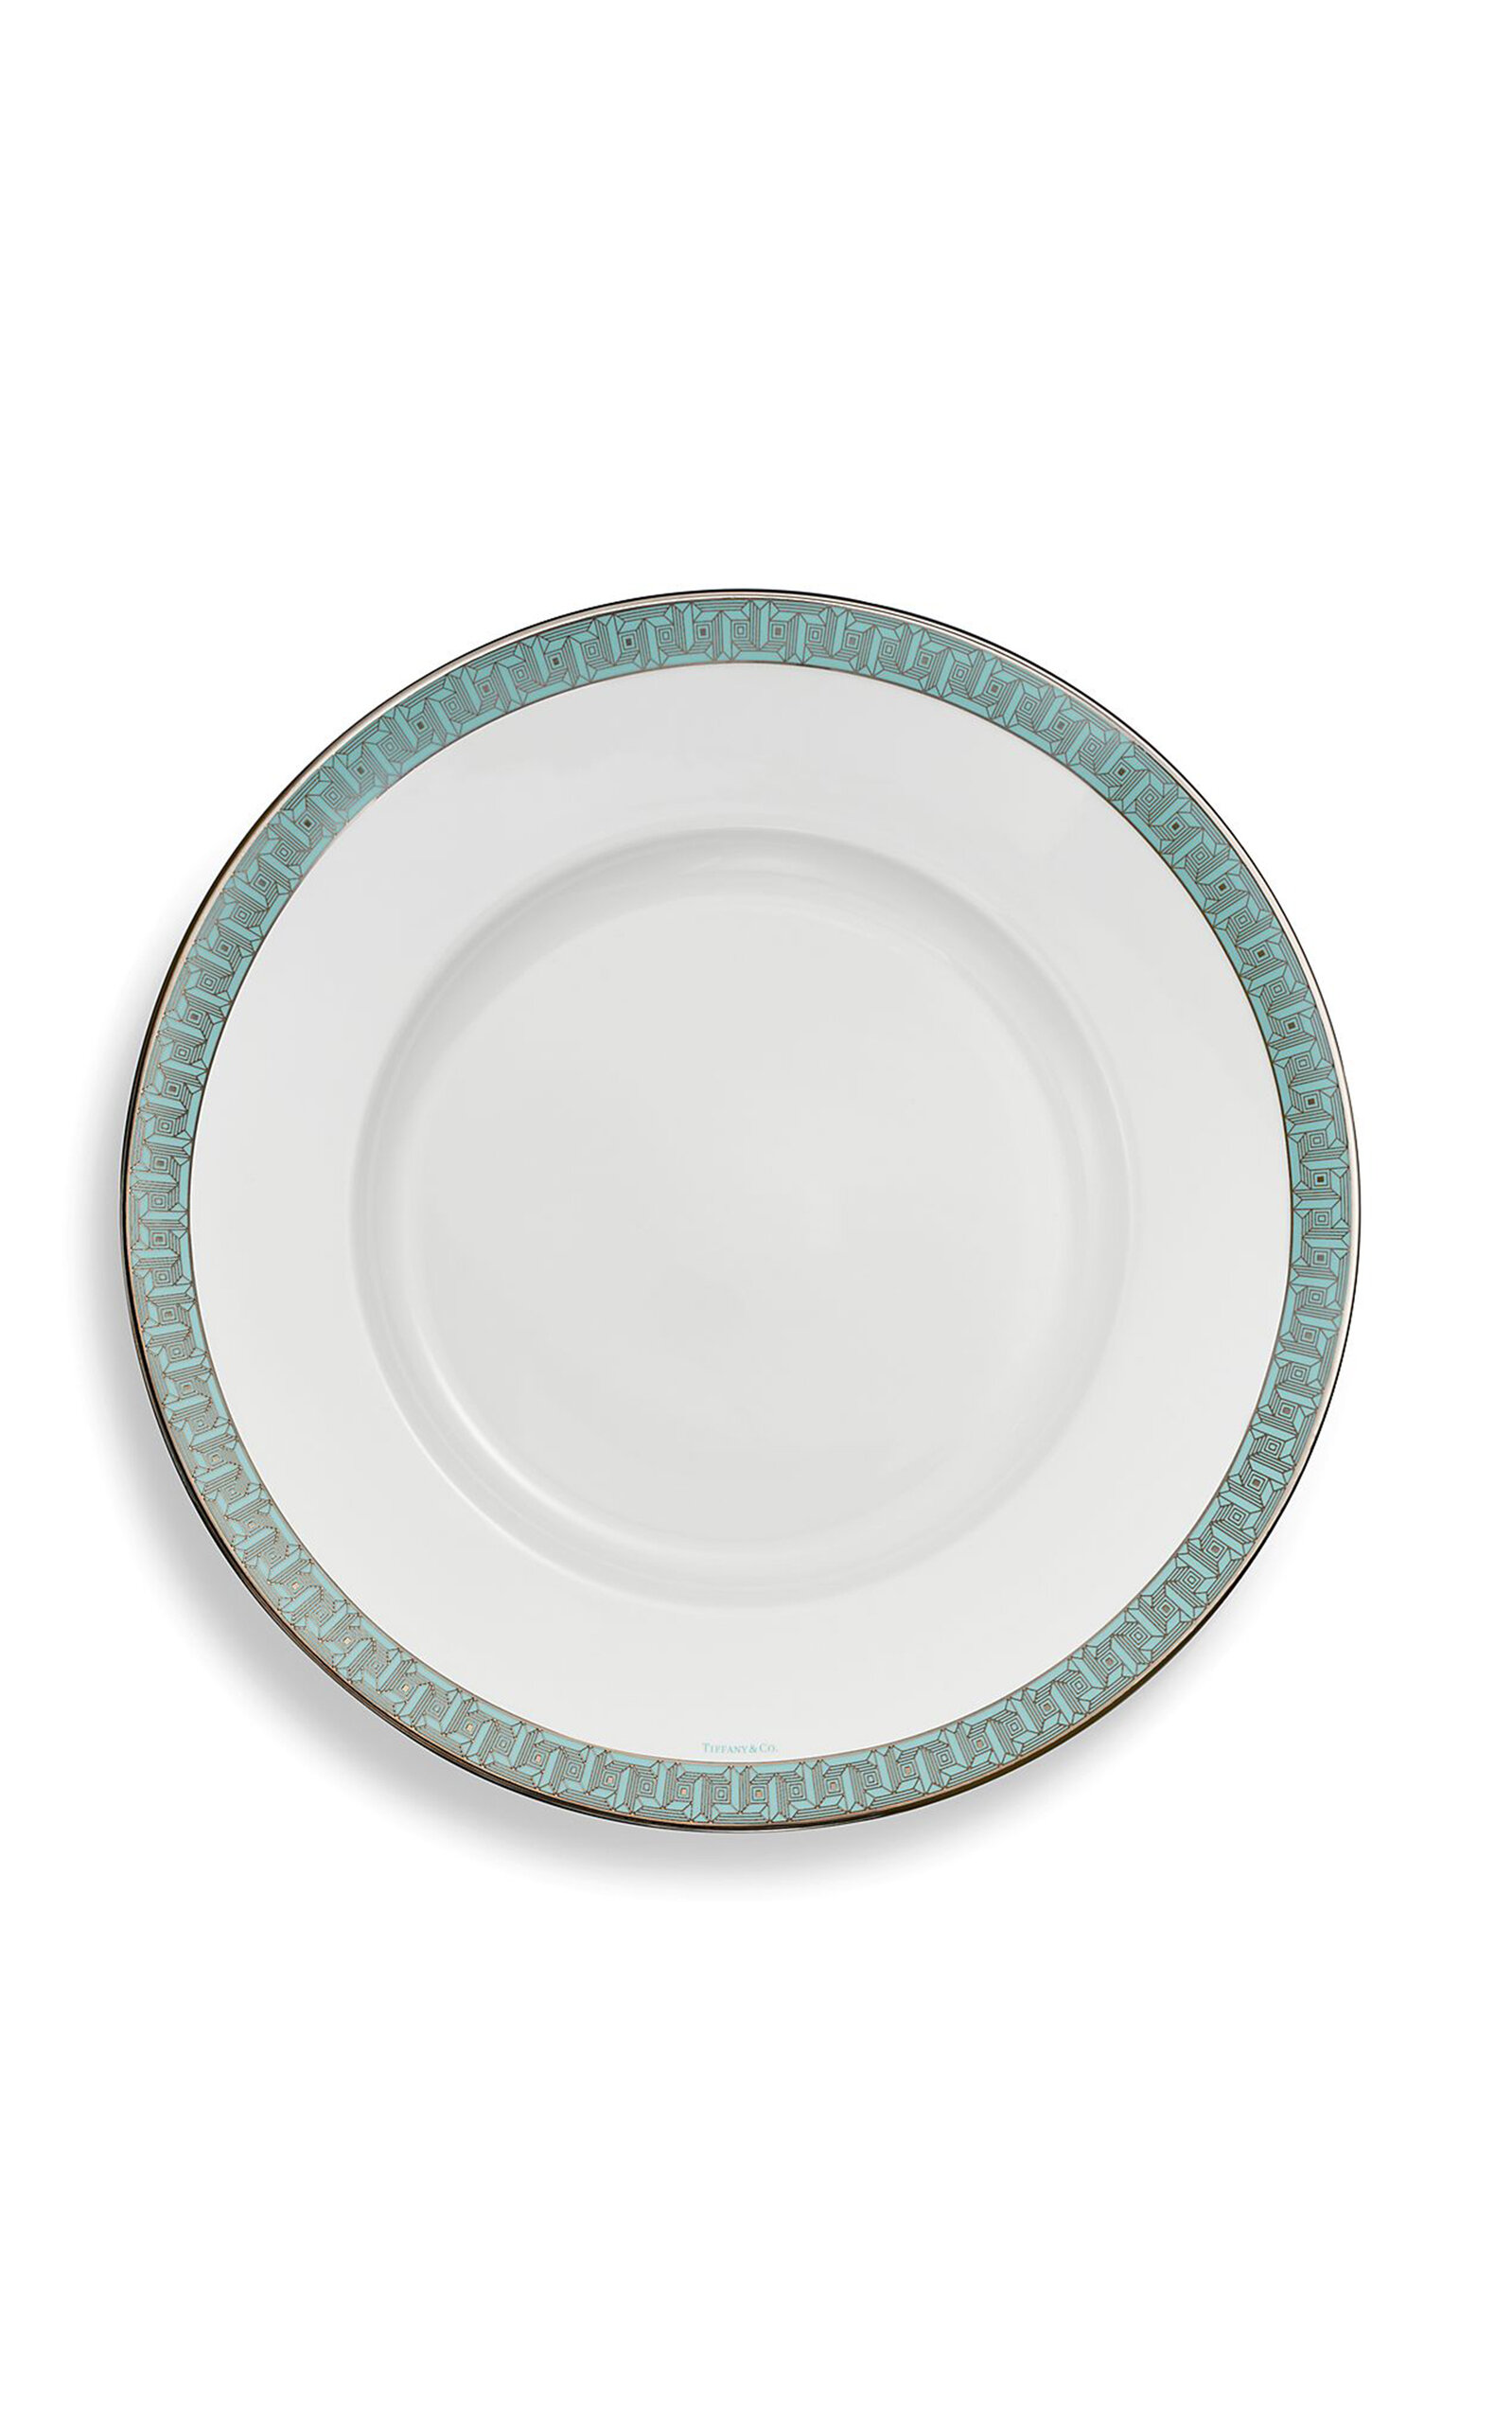 Tiffany & Co T True Porcelain Charger Plate In Blue